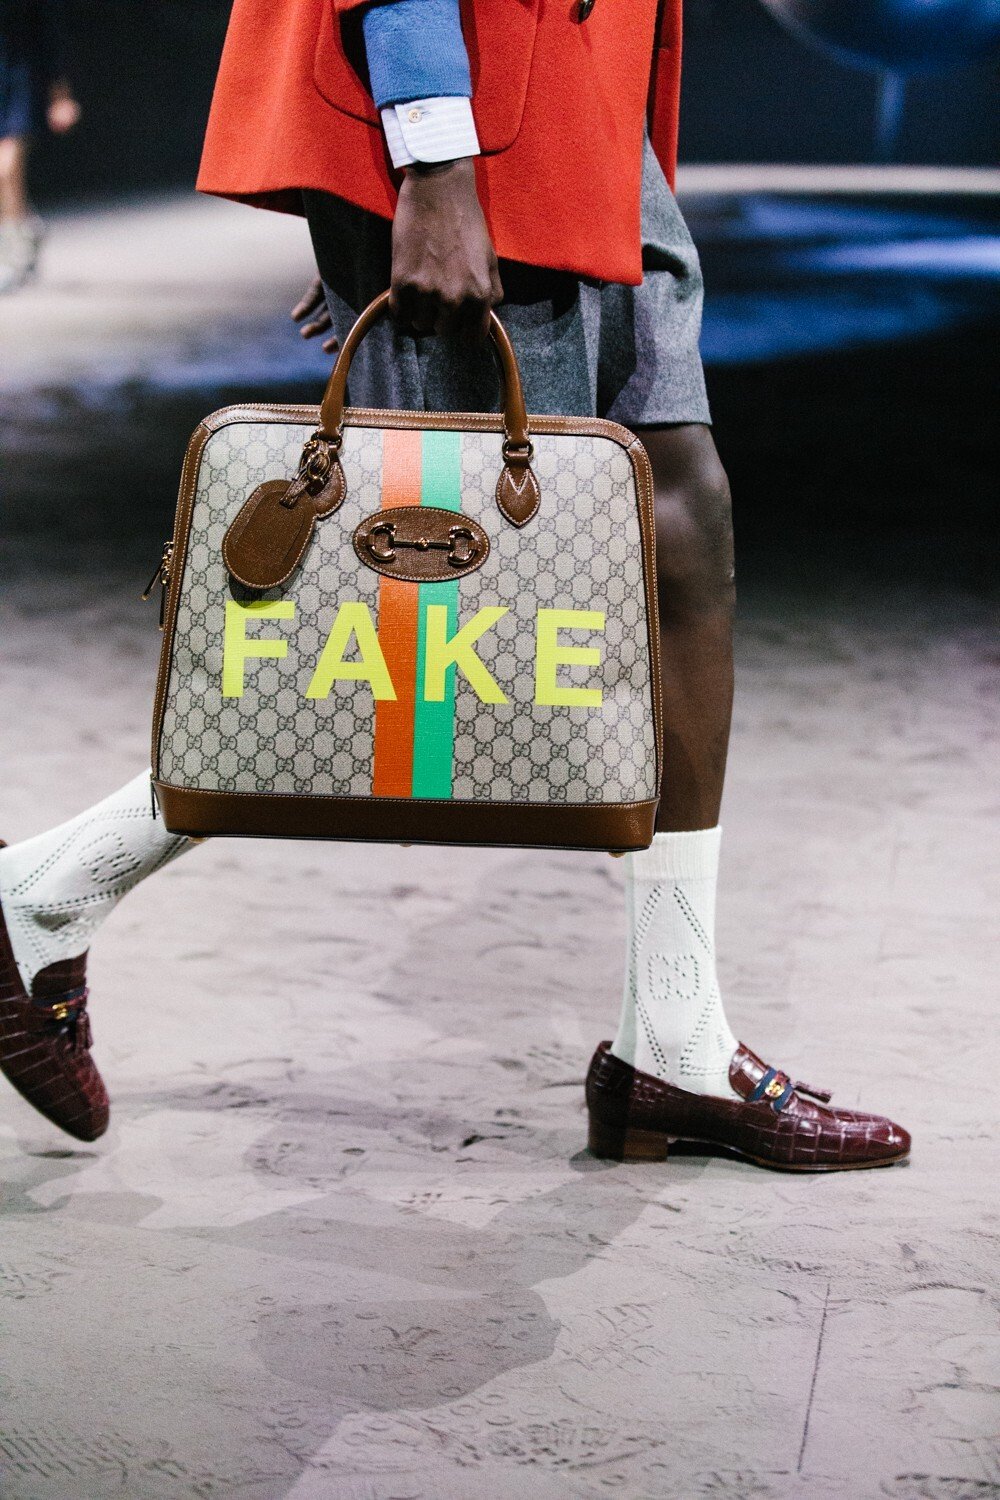 Arriba 63+ imagen gucci fake/not collection